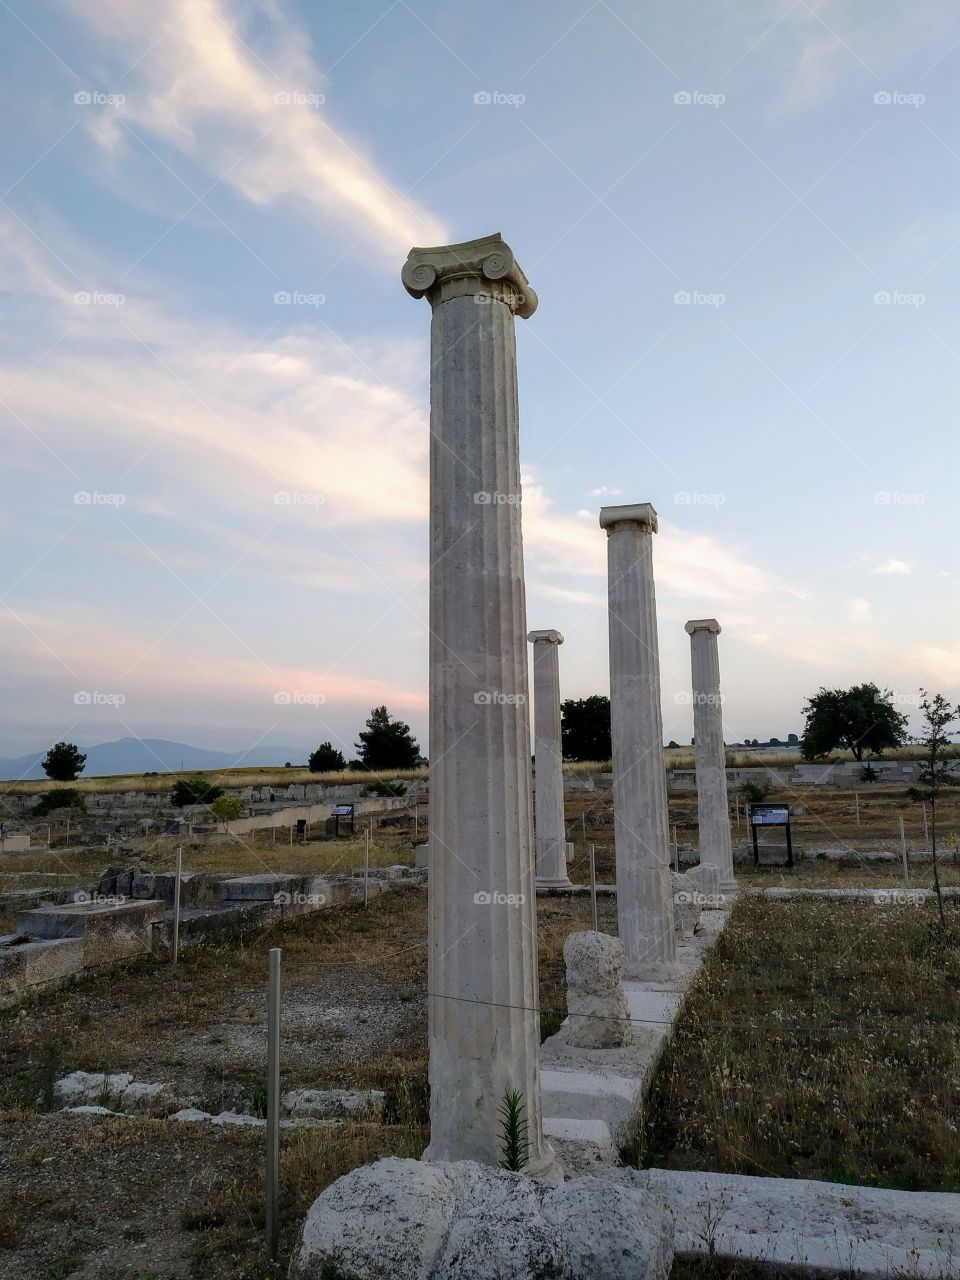 Sunrise at Pella, Macedonia, Greece, the birthplace of Alexander the Great!